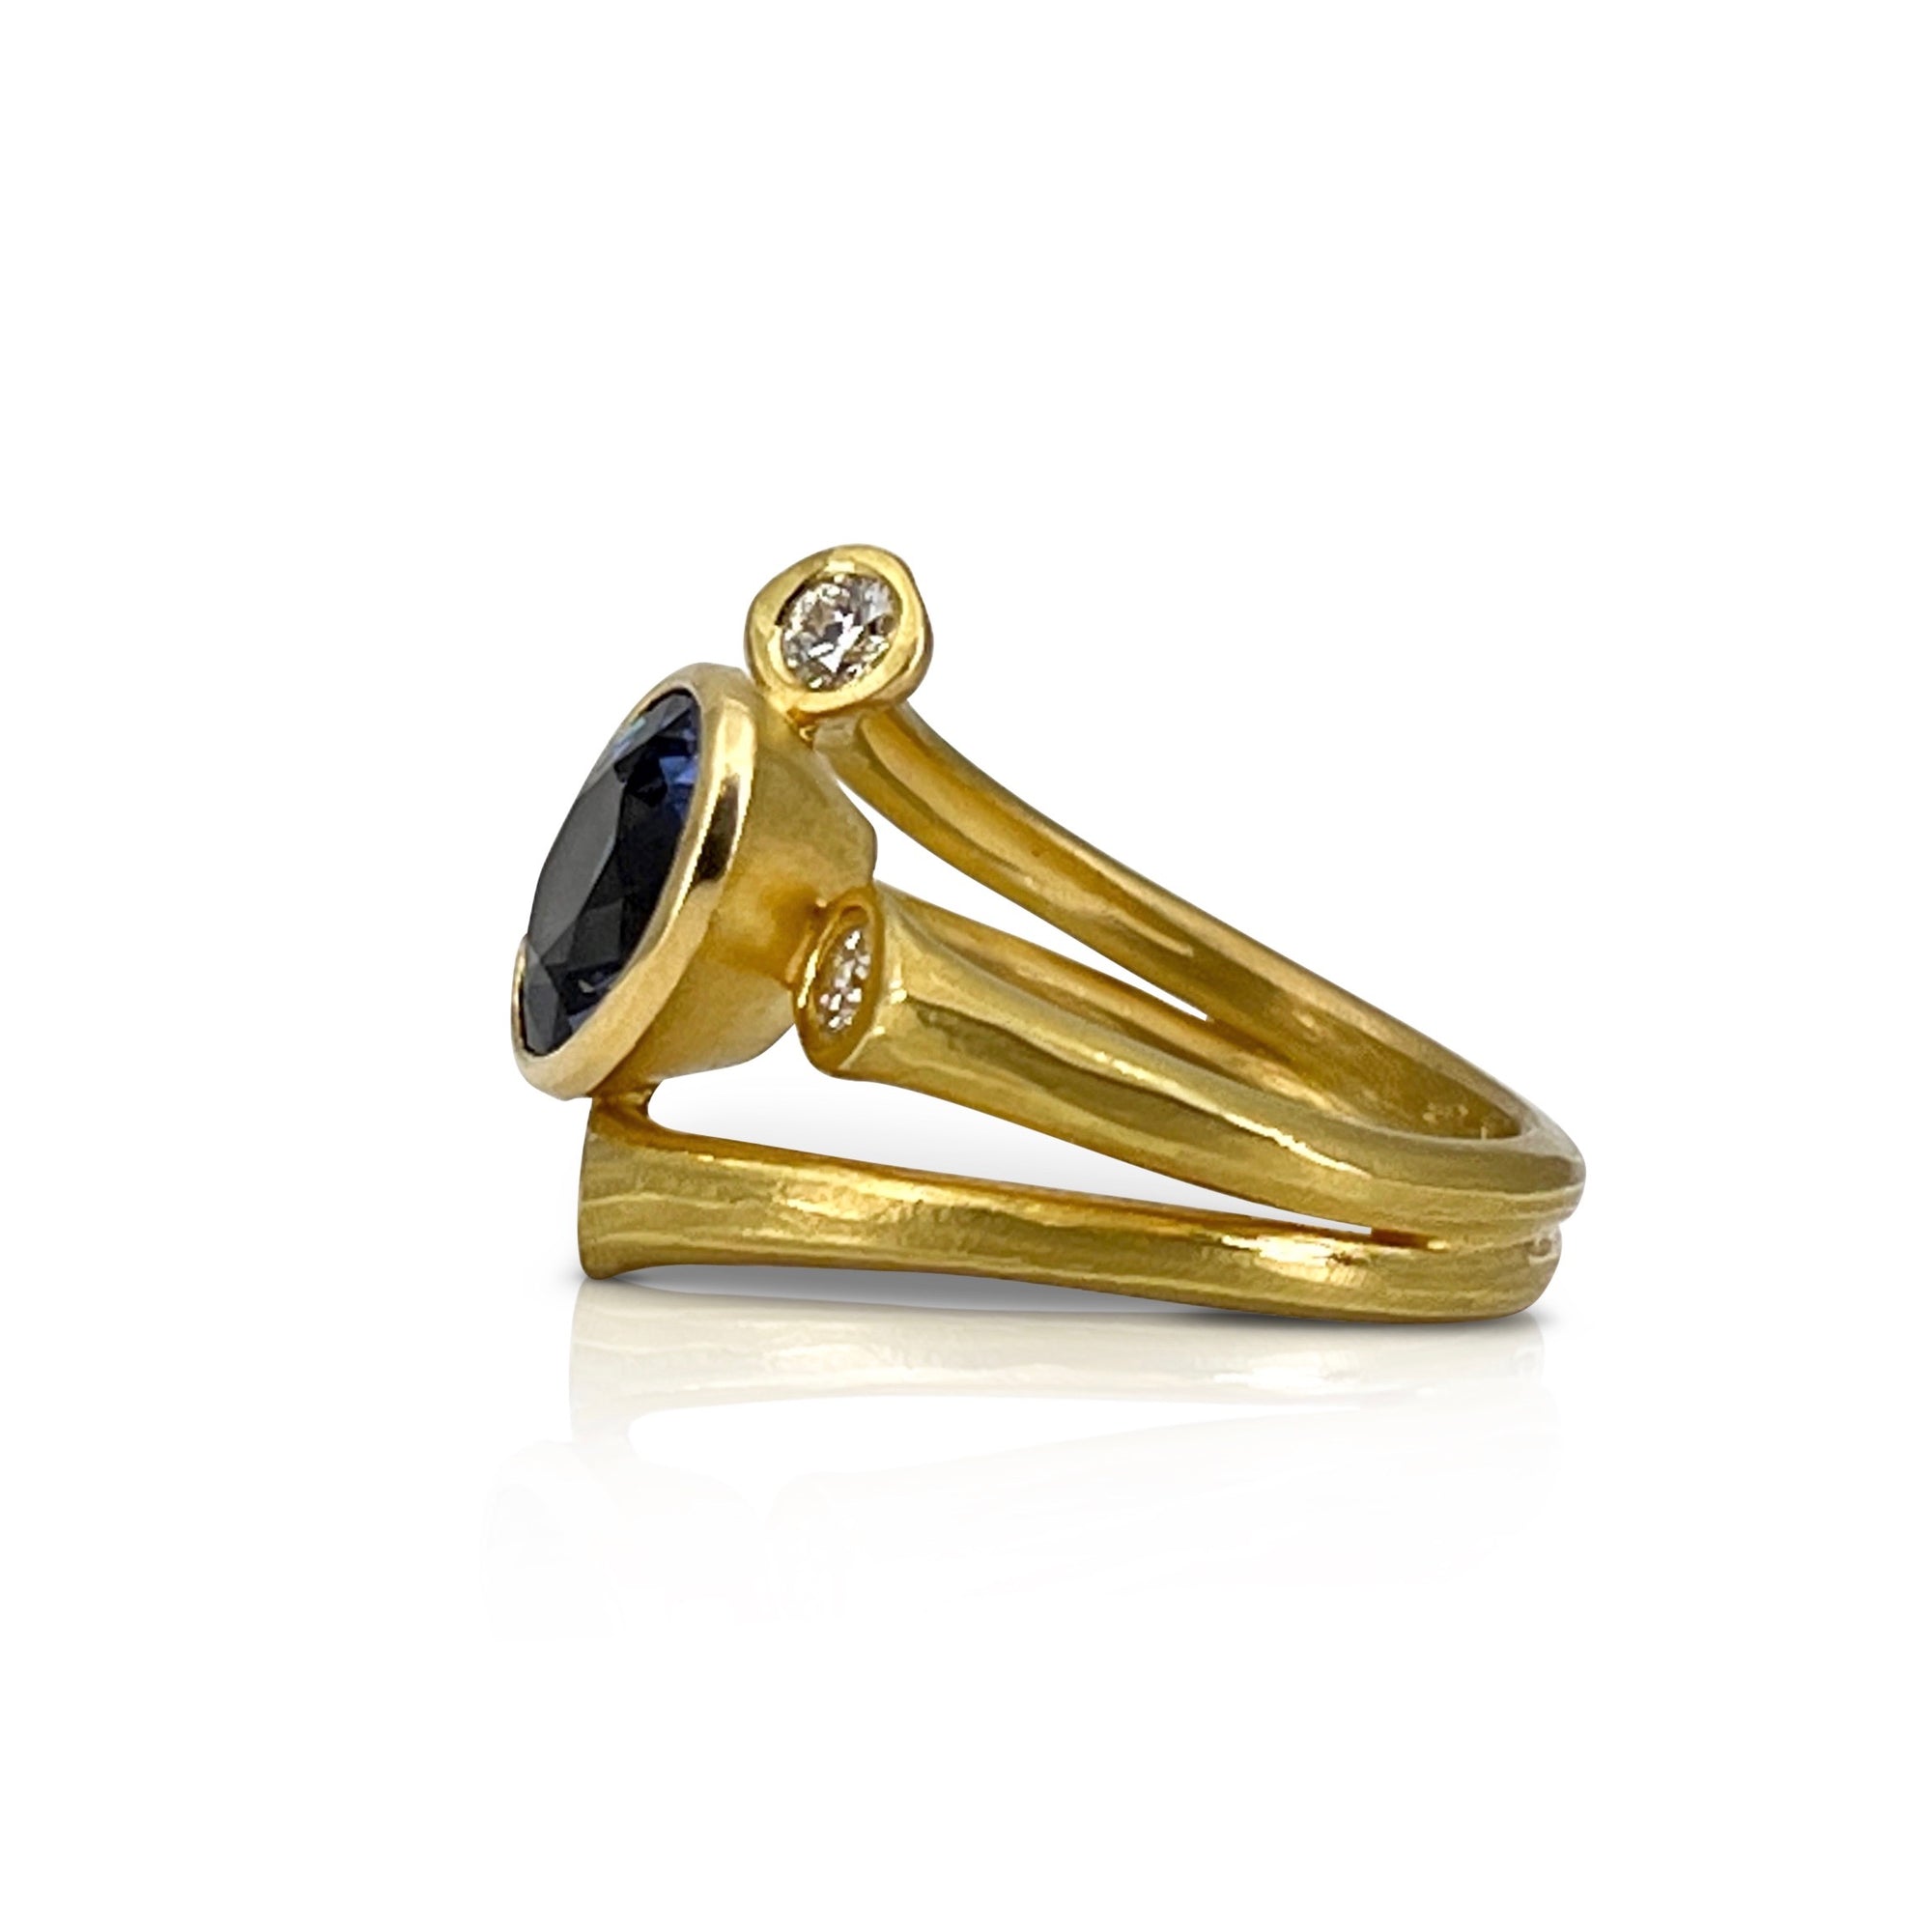 Star cluster ring in 18K yellow gold with blue spinel and diamonds made by Ayesha Mayadas